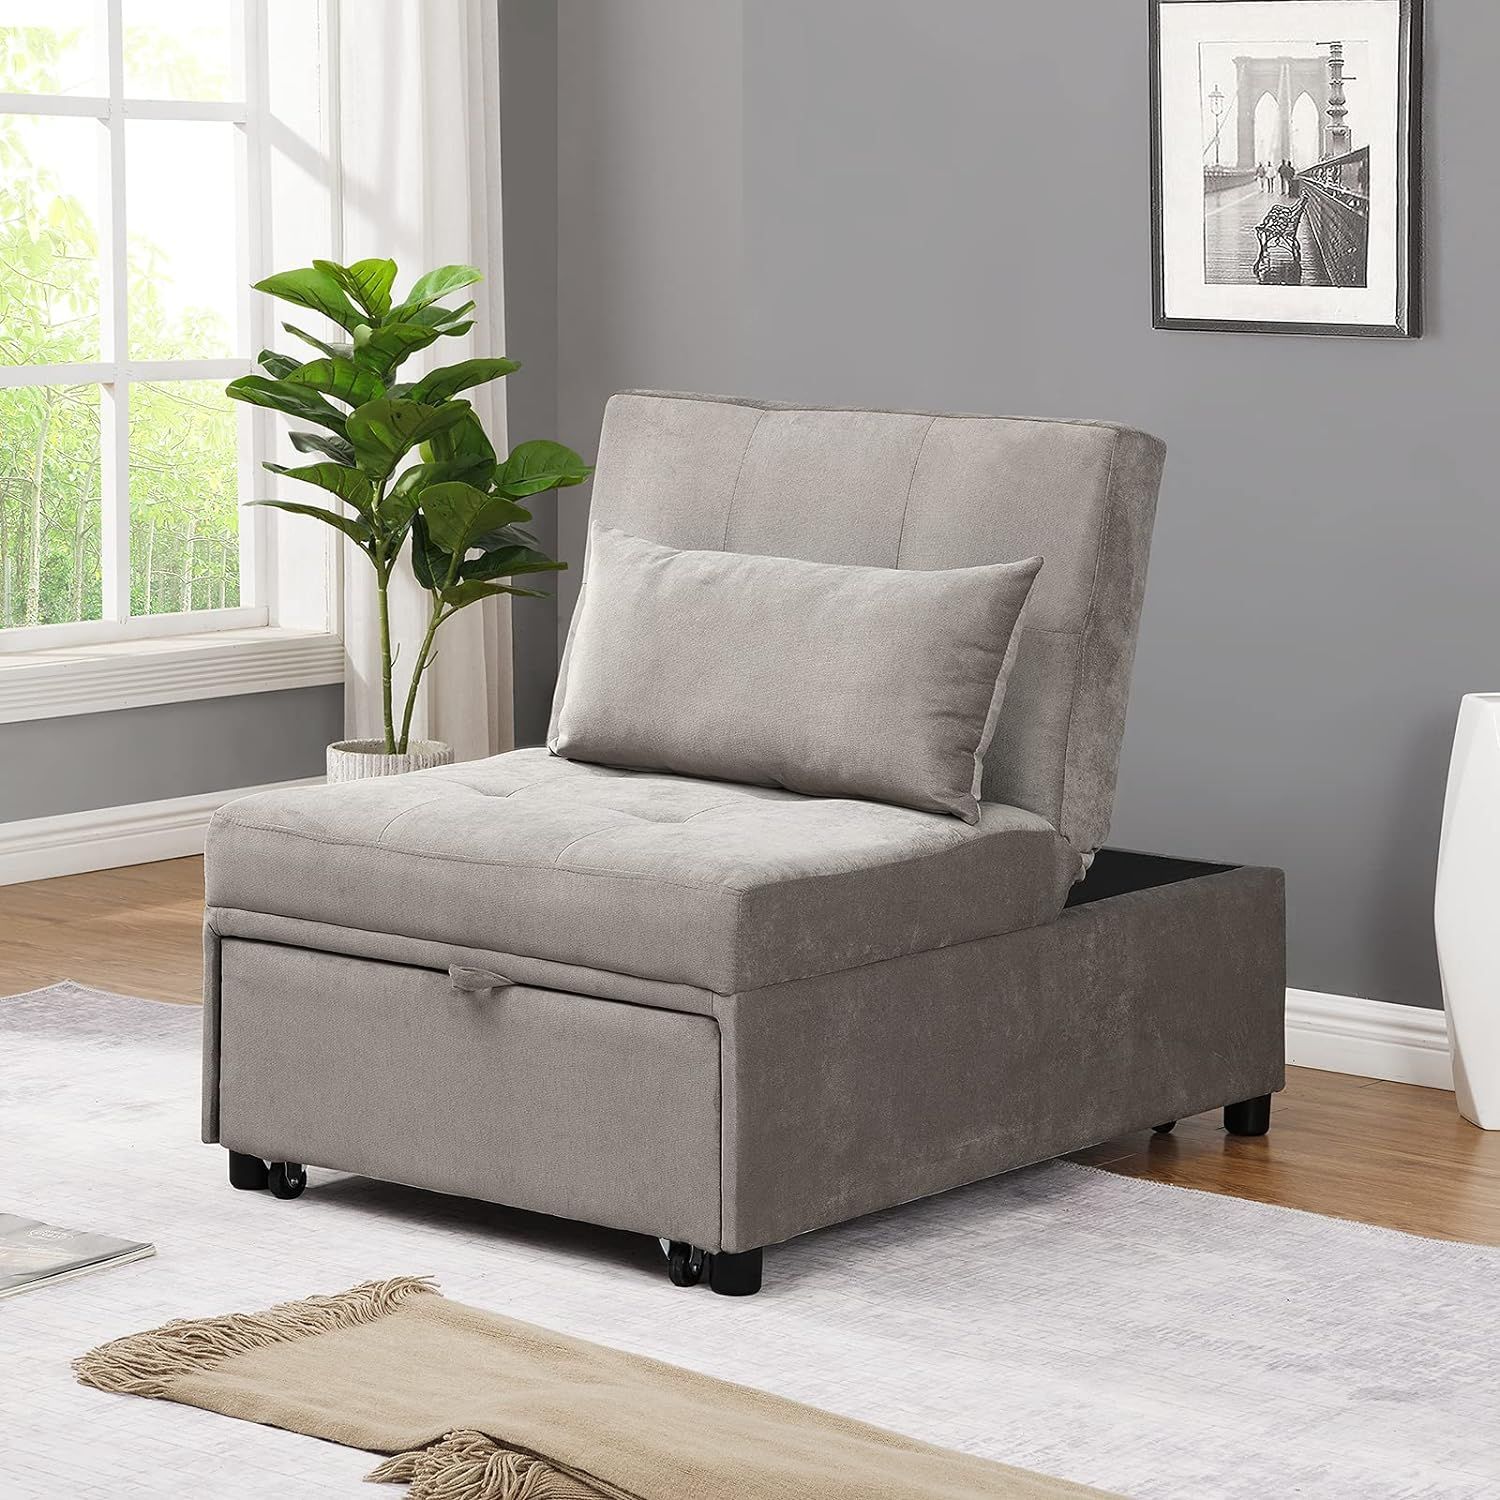 N B Sofa Bed, Convertible Chair 4 In 1 India | Ubuy With Regard To 4 In 1 Convertible Sleeper Chair Beds (View 11 of 15)